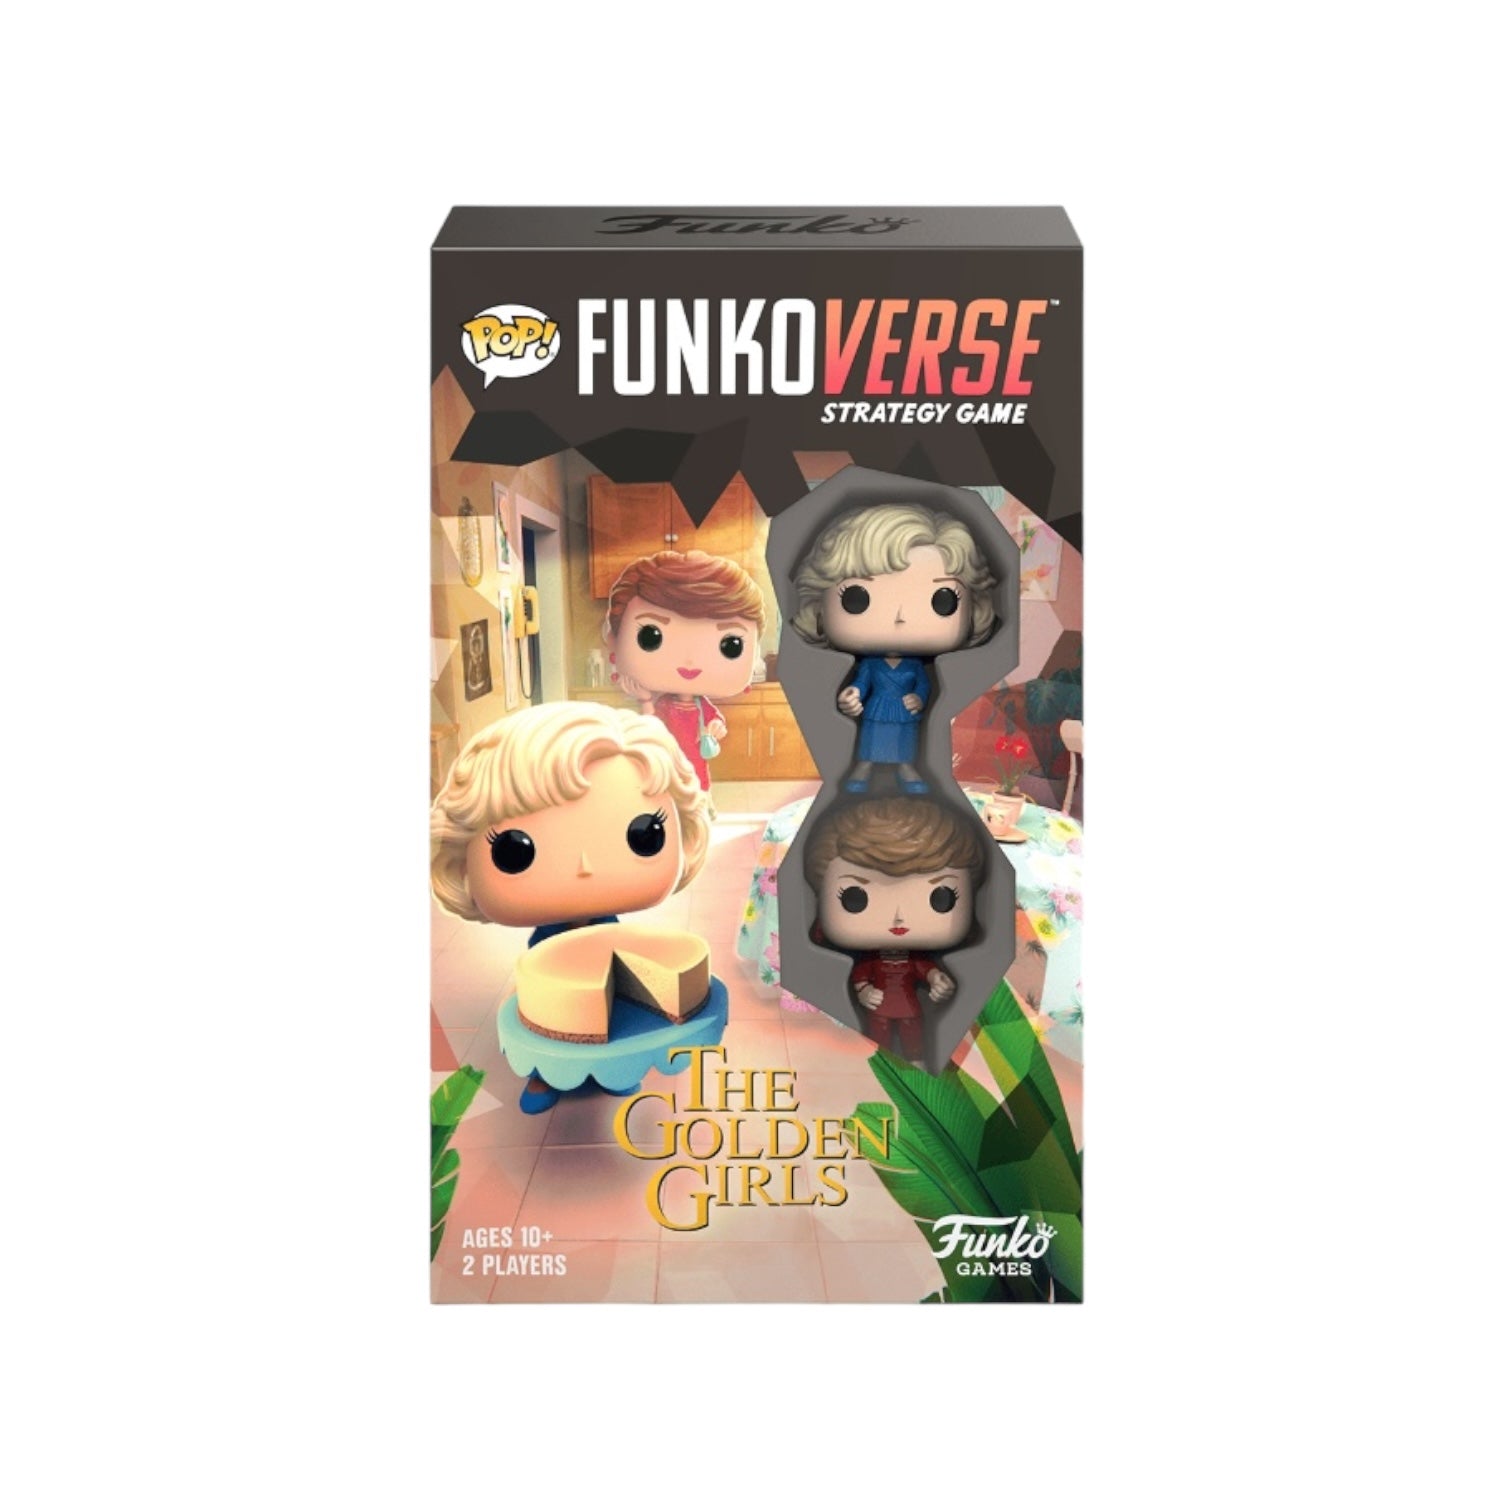 The Golden Girls  Funkoverse Strategy Game